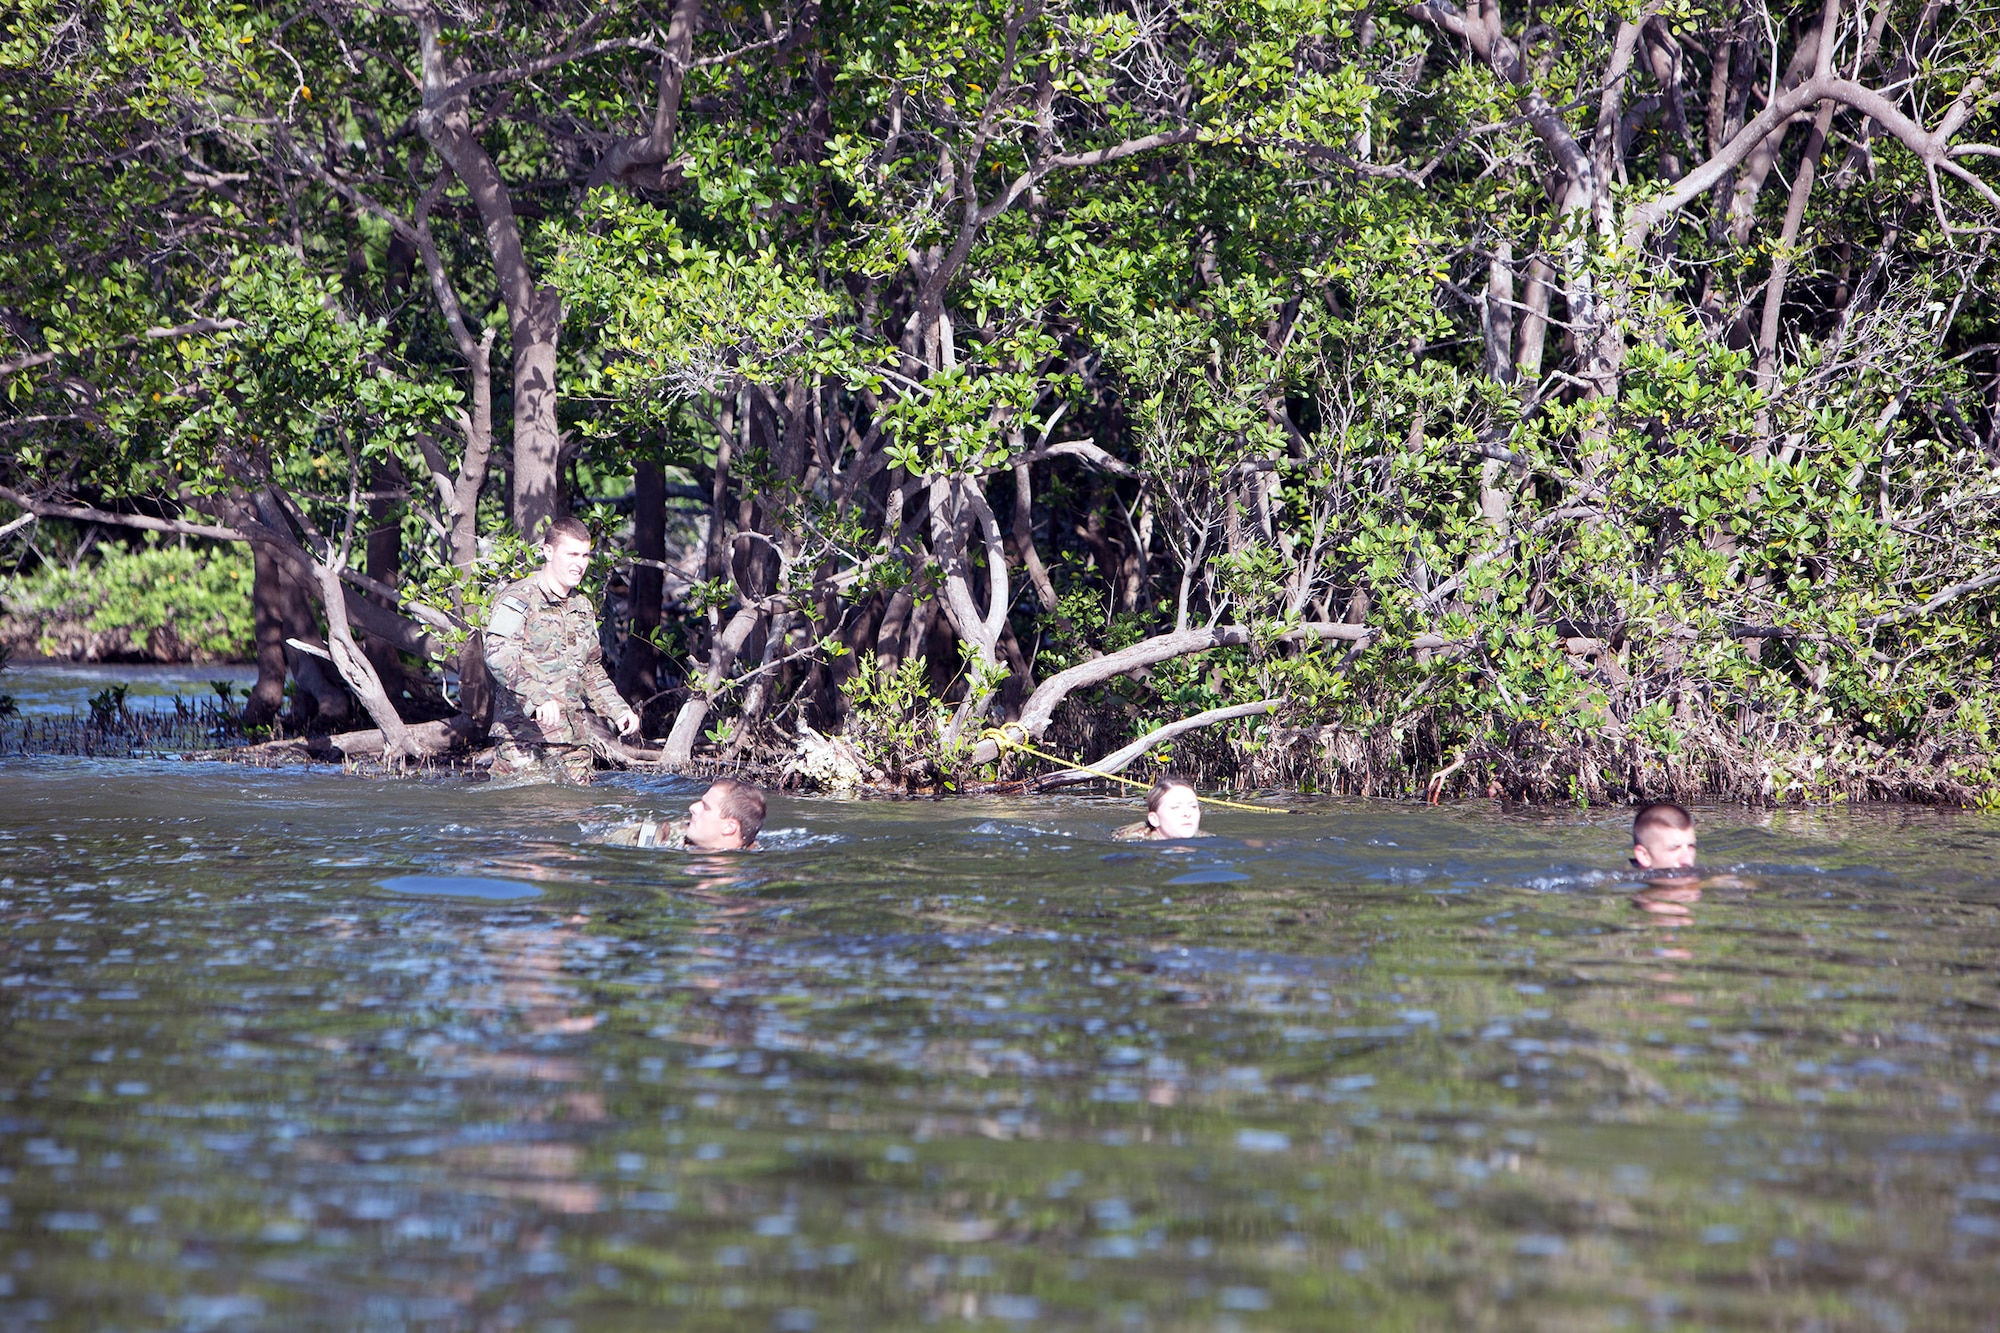 Senior Airman Jeffrey Gebhardt (right), 446th Force Support Squadron client systems technician, out of Joint Base Lewis-McChord, Washington, and his teammates swim through one of the numerous obstacles at Warrior Spirit, Aug. 18, 2014 at MacDill Air Force Base, Florida. Gebhardt has been assigned to the Joint Communications Support Element at MacDill since November 2013, and is on long-term orders to continue his needed support. Warrior Spirit is a weeklong team-based exercise built to validate technical and tactical skills while creating unit cohesion. (Courtesy photo/JCSE)